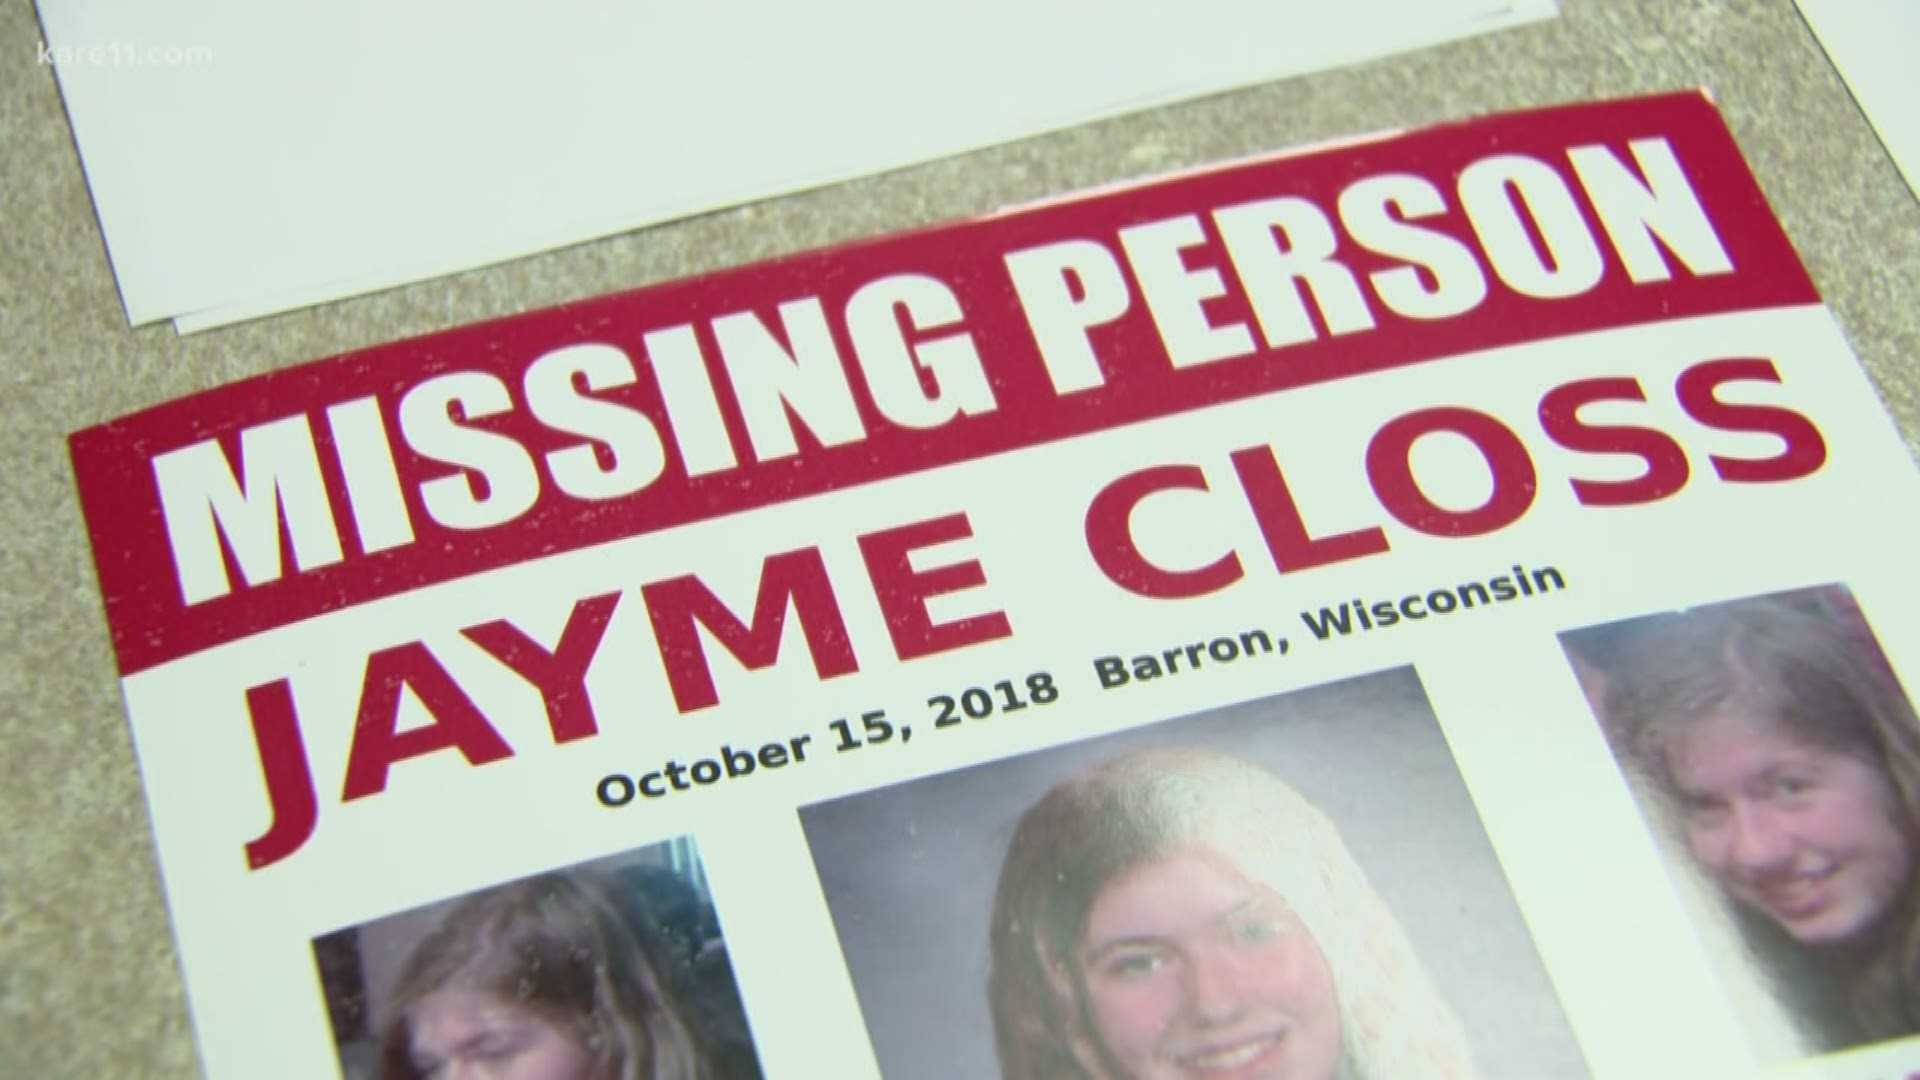 October 15, 2019 marks one year since James and Denise Closs were murdered in their home, and their daughter Jayme was kidnapped and held captive for 88 days.